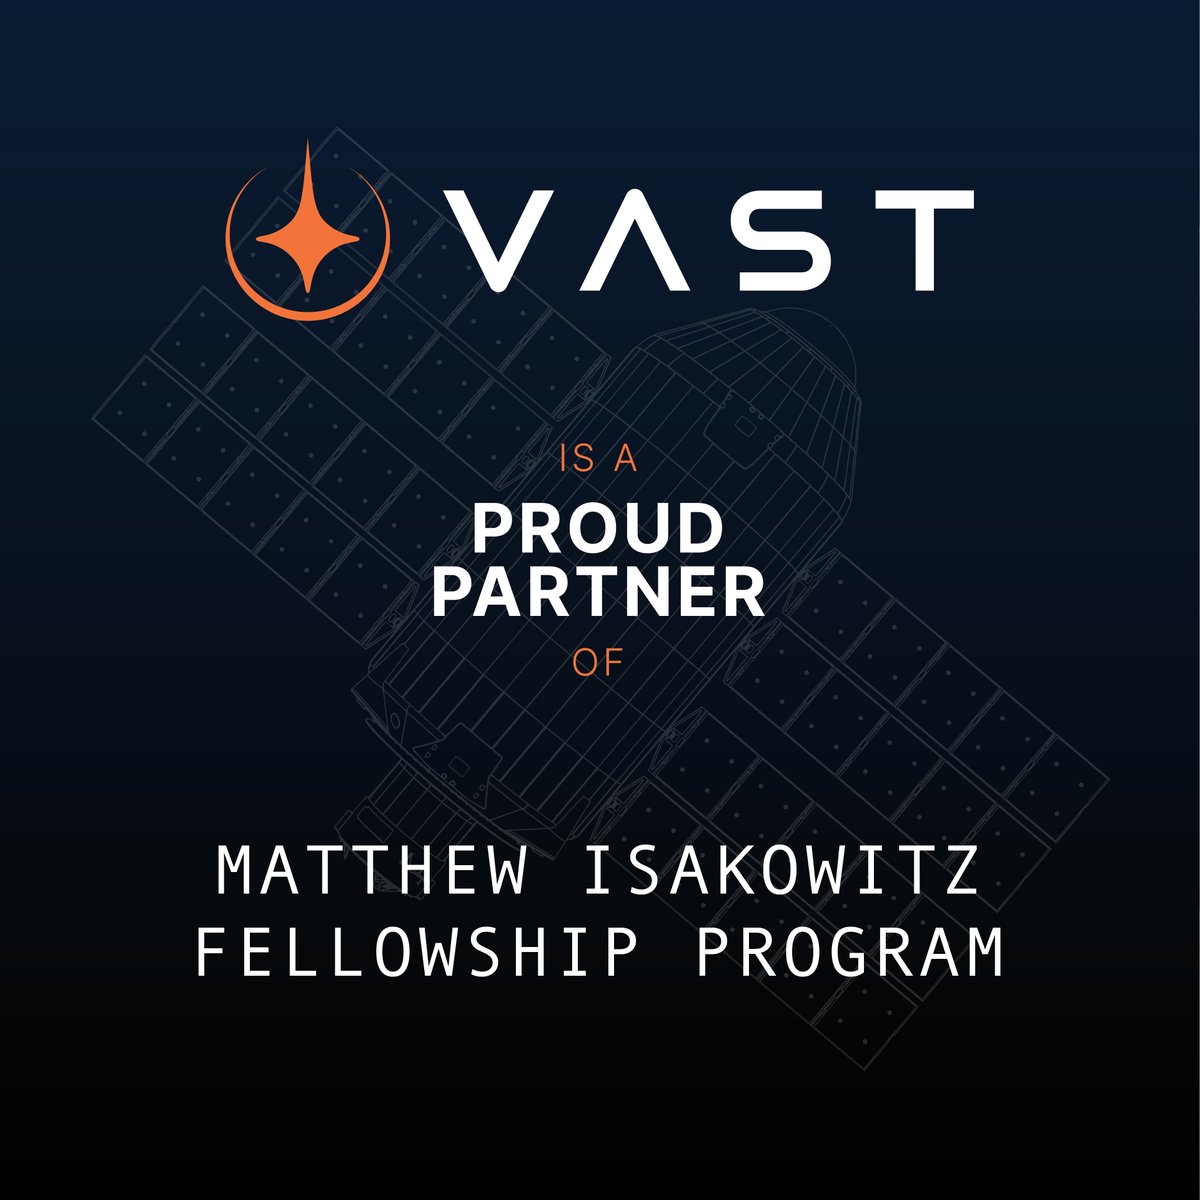 Vast is a proud supporter of the Matthew Isakowitz Fellowship Program (@mattfellowship), which supports exceptional college juniors, seniors, and graduate students pursuing careers in the commercial spaceflight industry. Learn more about the fellowship here →